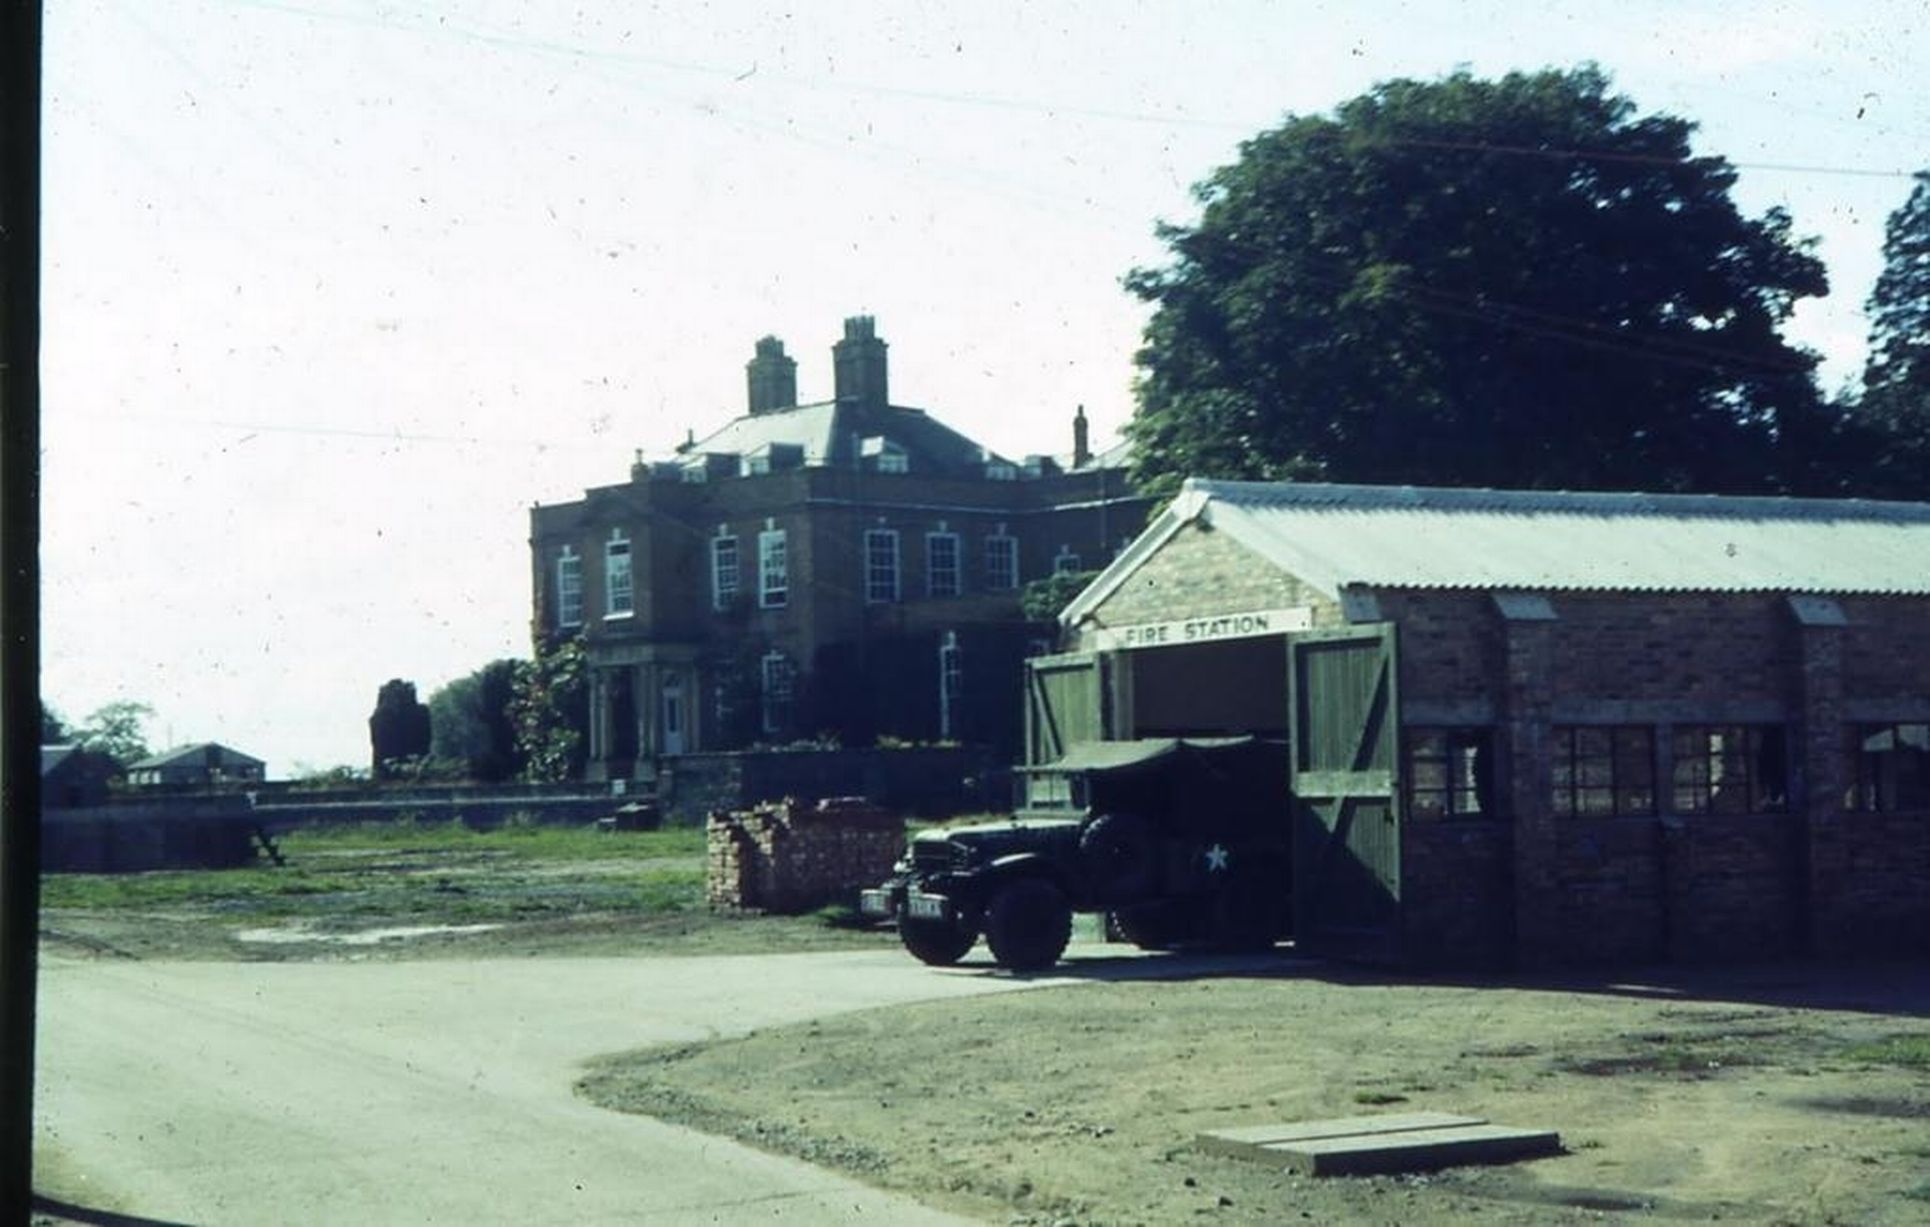 A grand country house in the UK has been taken over by American forces for a hospital during the Second World War